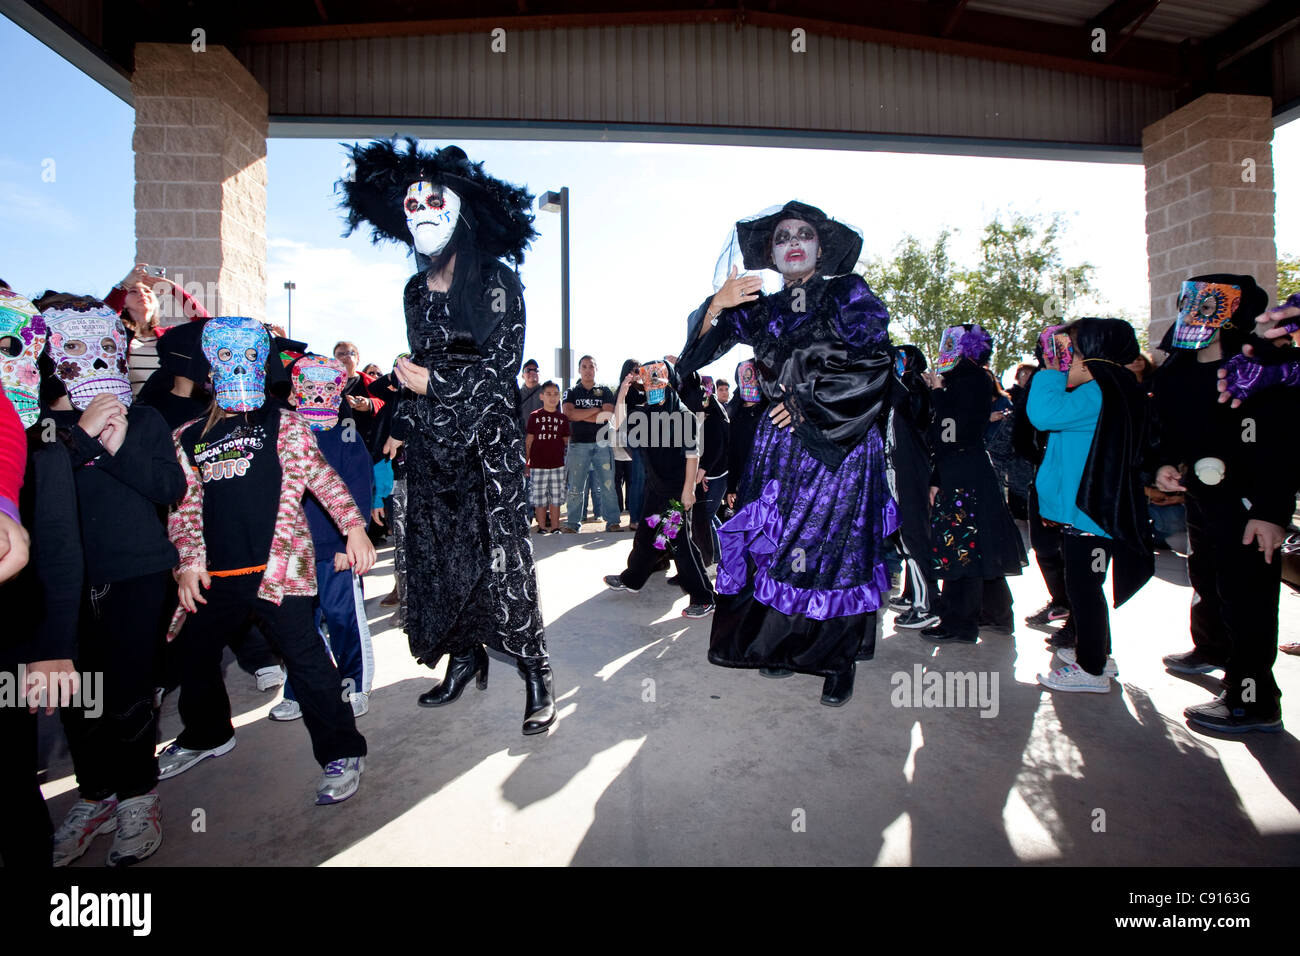 Texas schoolchildren wait before performing at the annual Kyle, TX 'Day of the Dead' or Dia de Los Muertos celebration Stock Photo